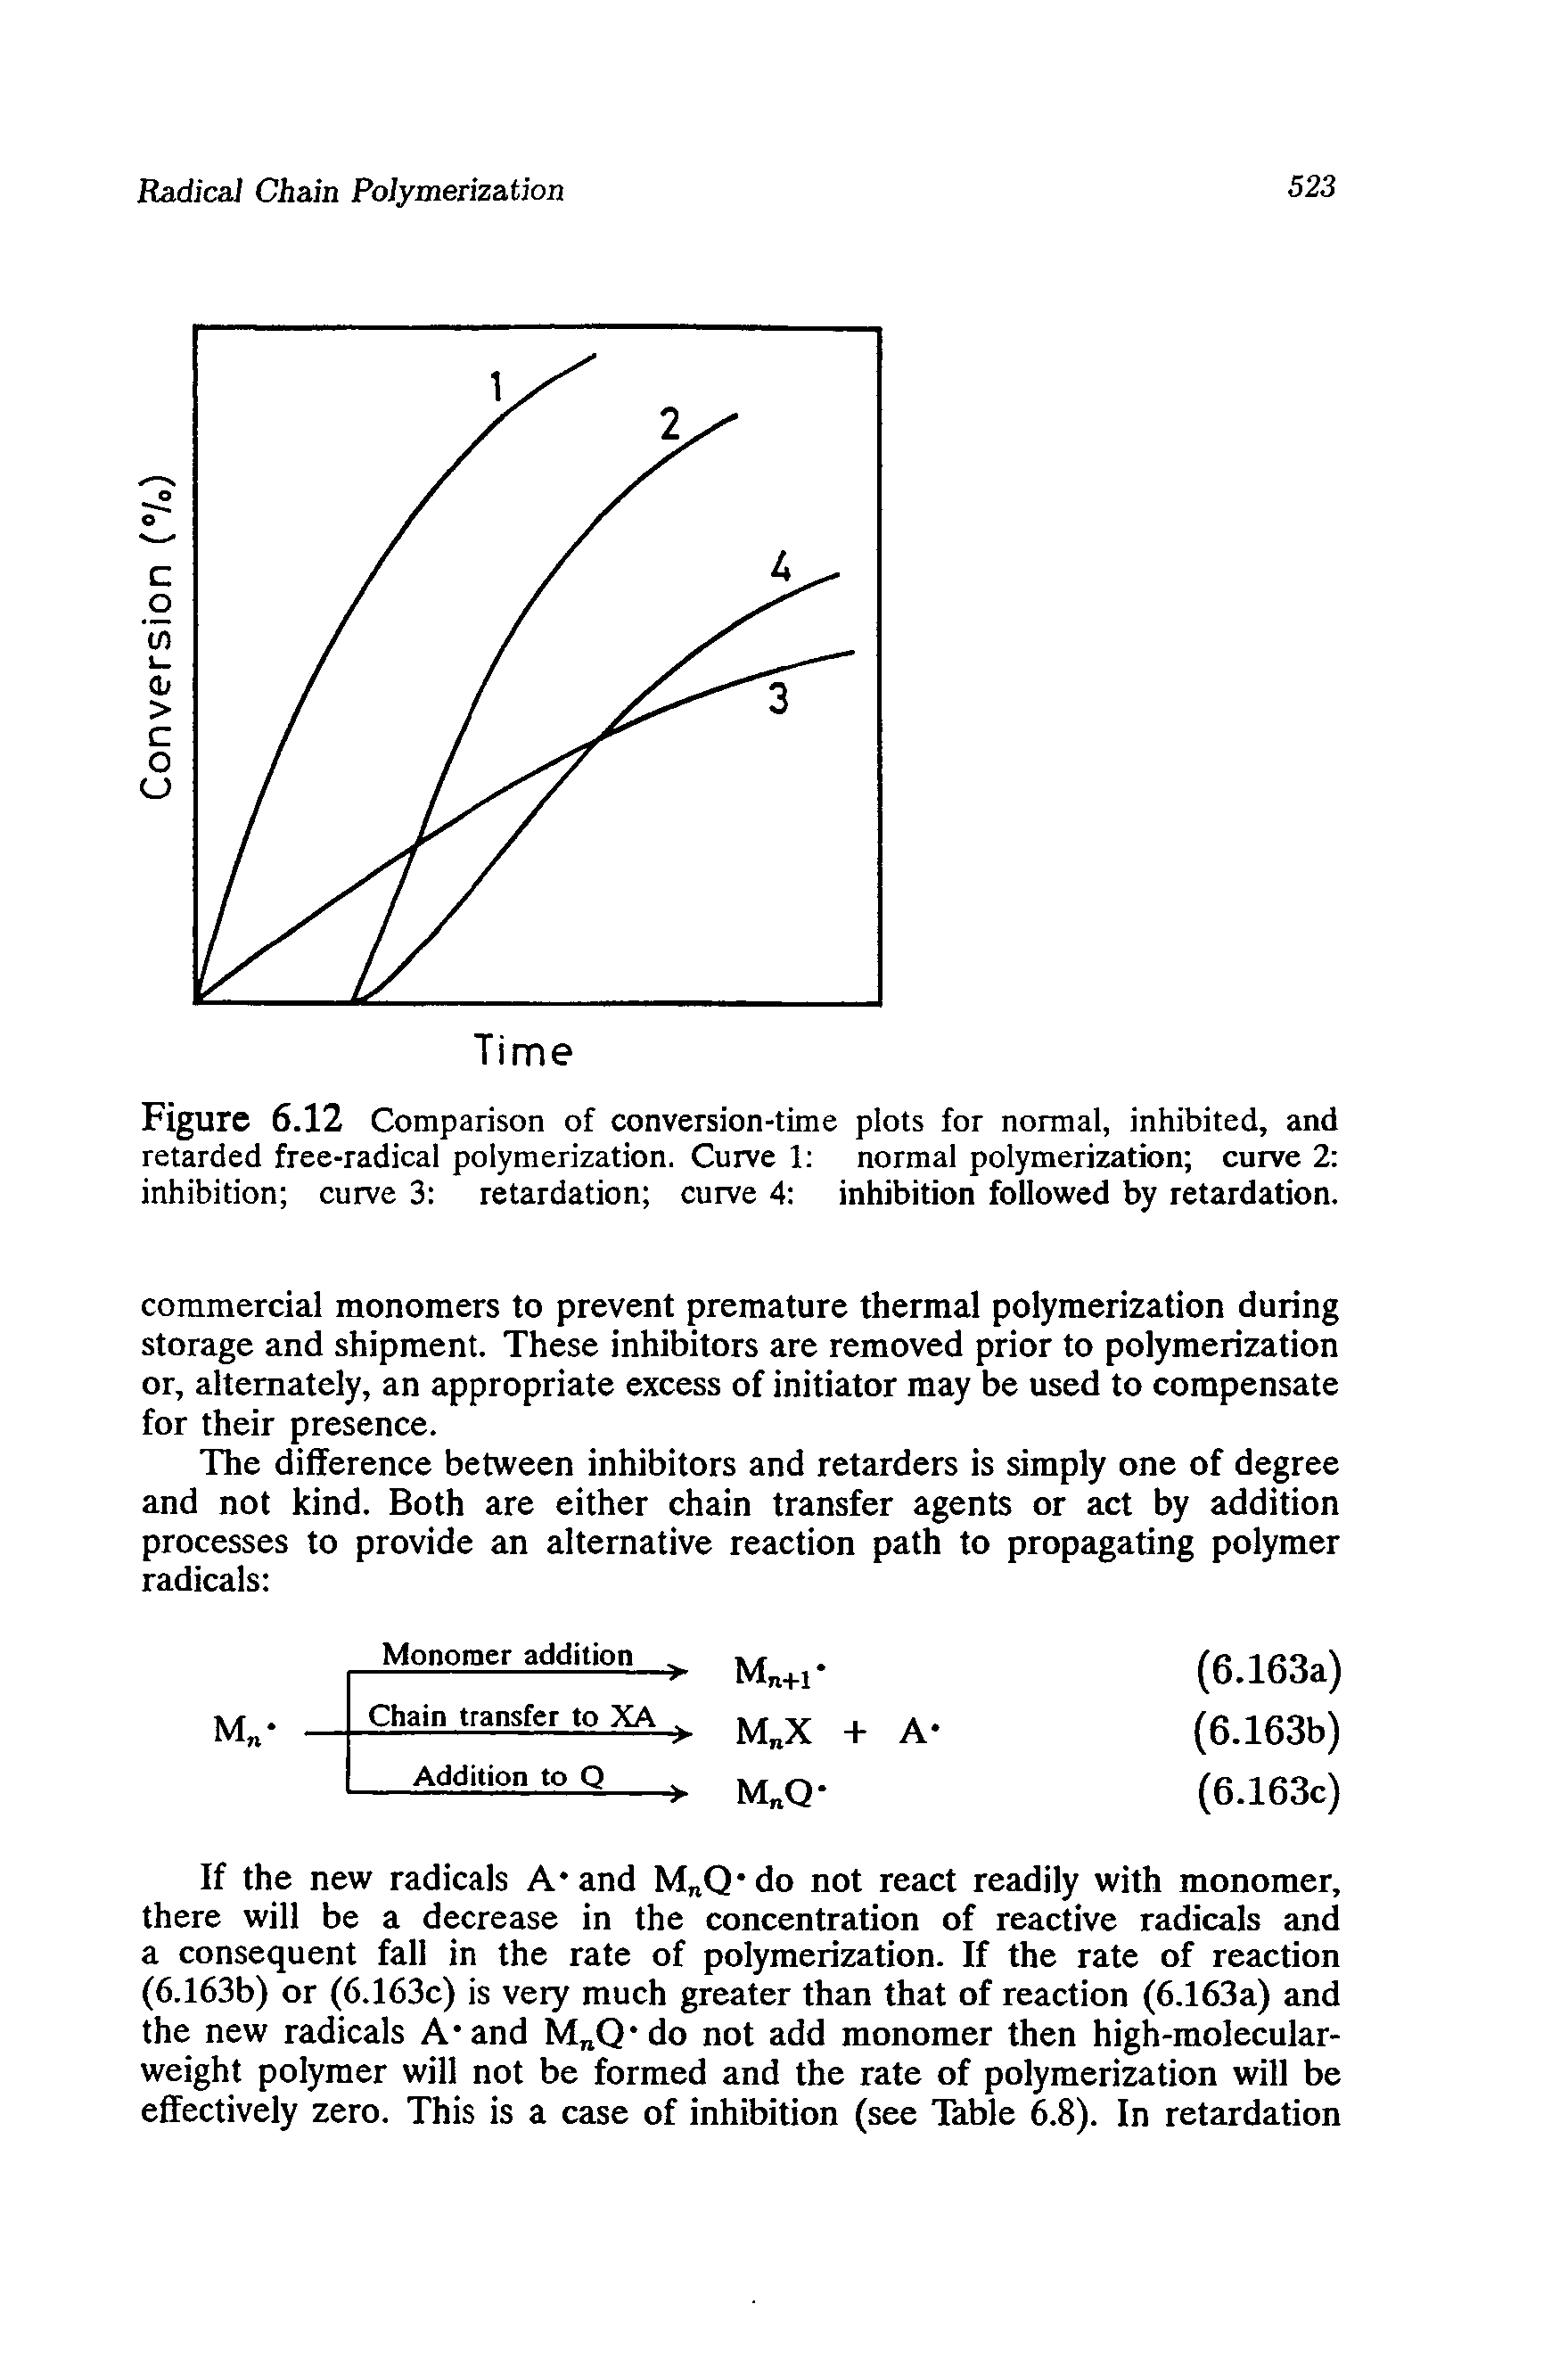 Figure 6.12 Comparison of conversion-time plots for normal, inhibited, and retarded free-radical polymerization. Curve 1 normal polymerization curve 2 inhibition curve 3 retardation curve 4 inhibition followed by retardation.